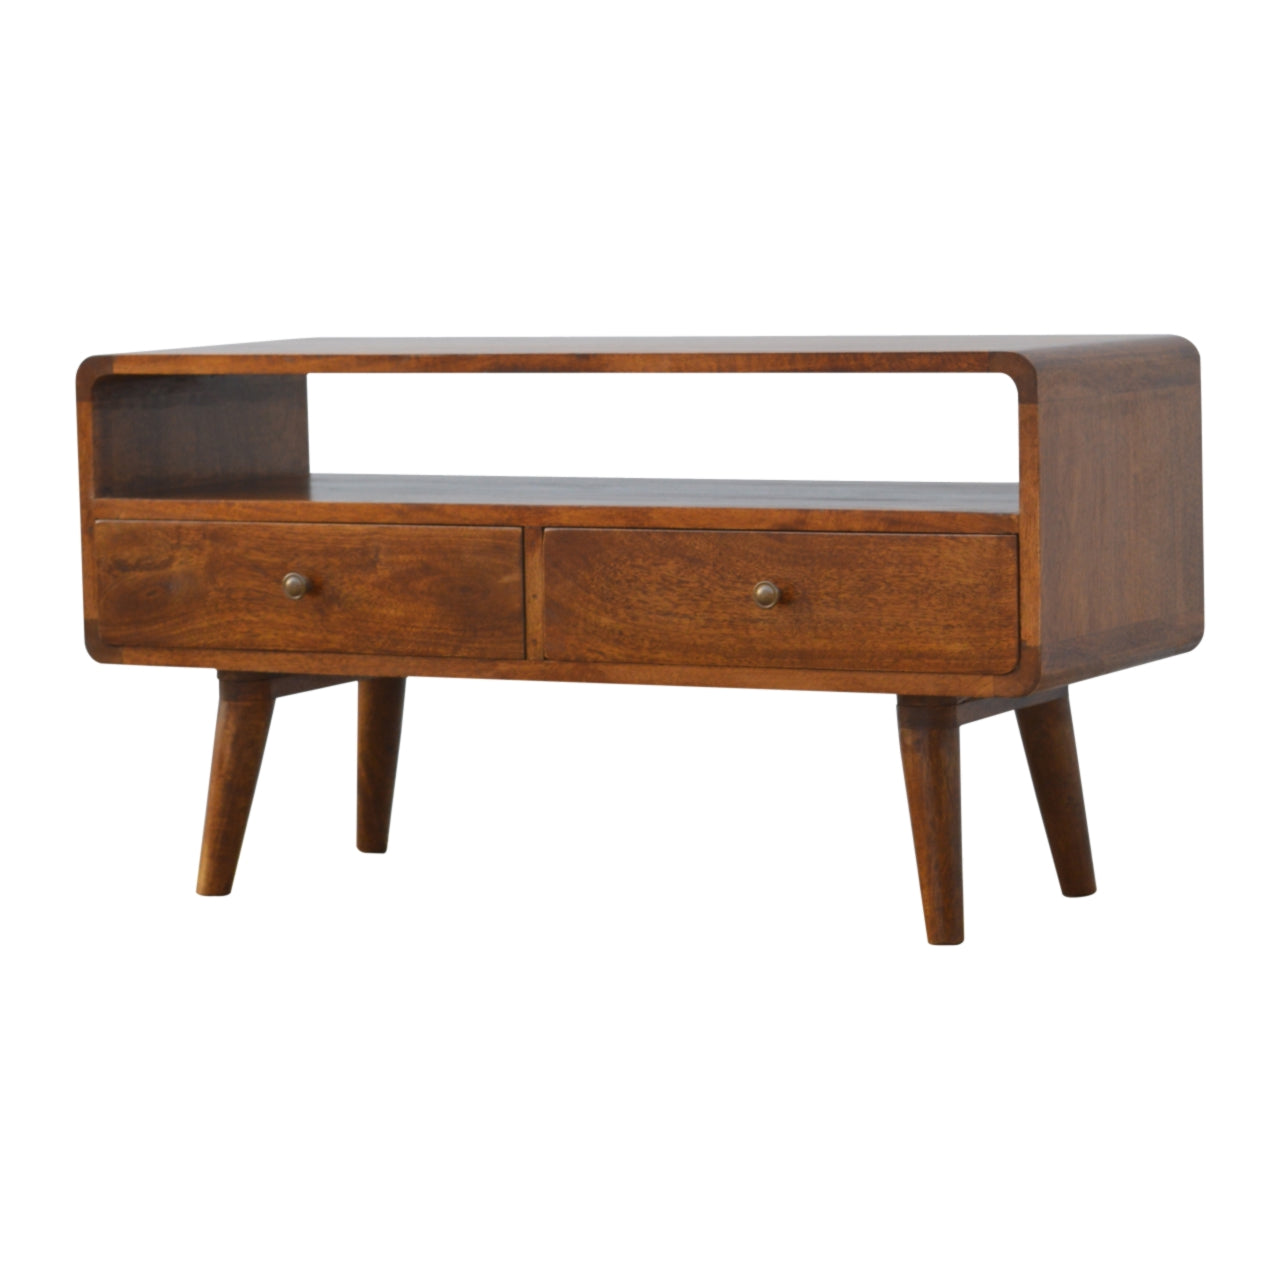 Solid Wood Curved Chestnut TV Stand with 2 Drawers